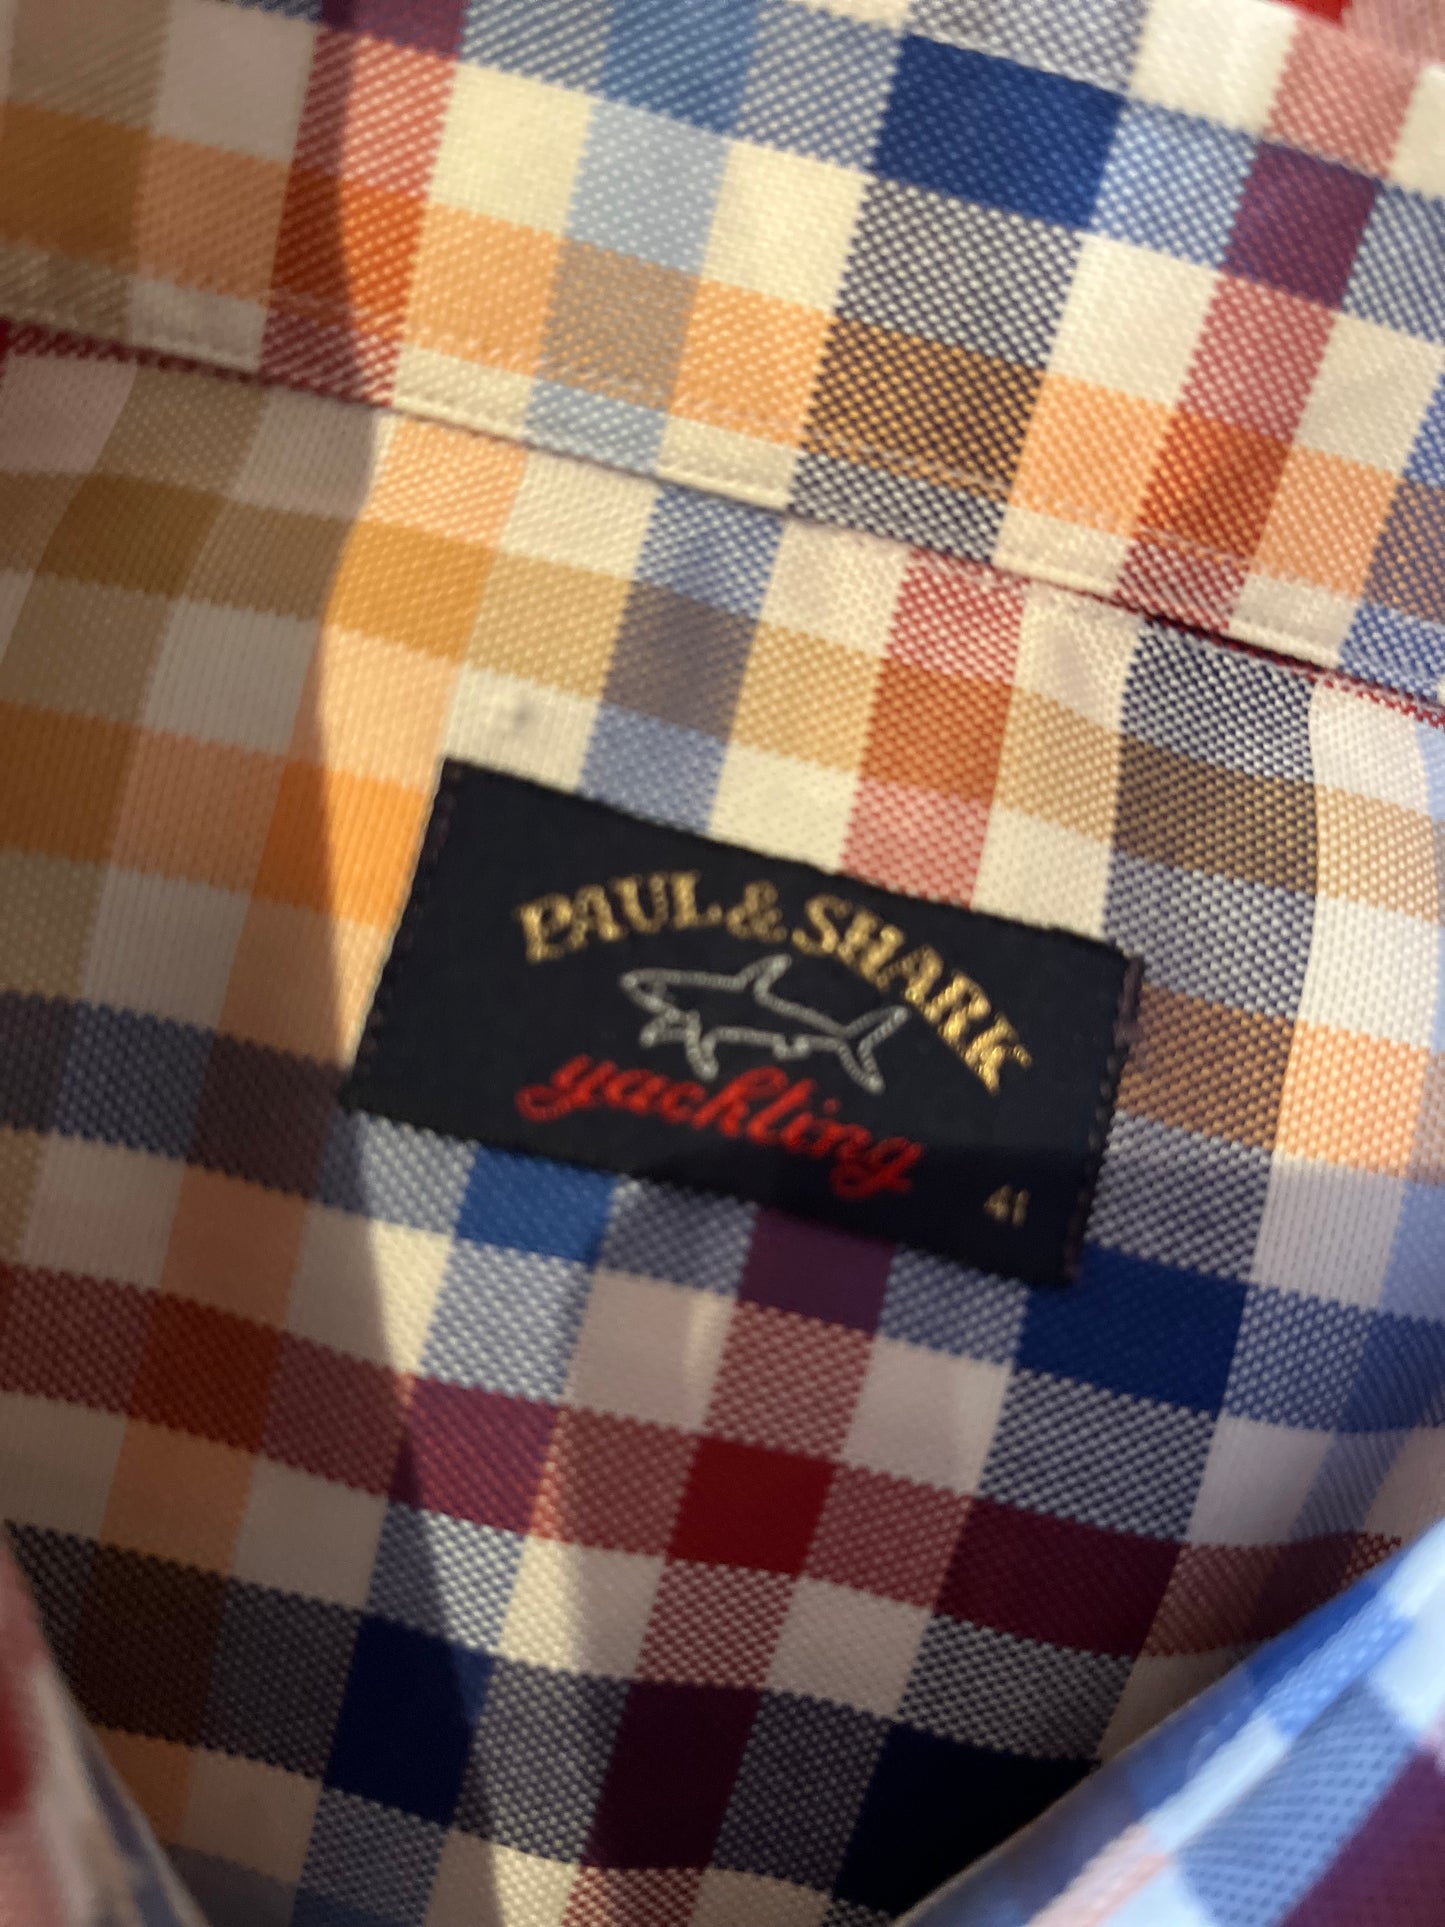 Paul & Shark 100% Cotton Red Blue Check Shirt Size 41 Large Made In Italy Classic Fit